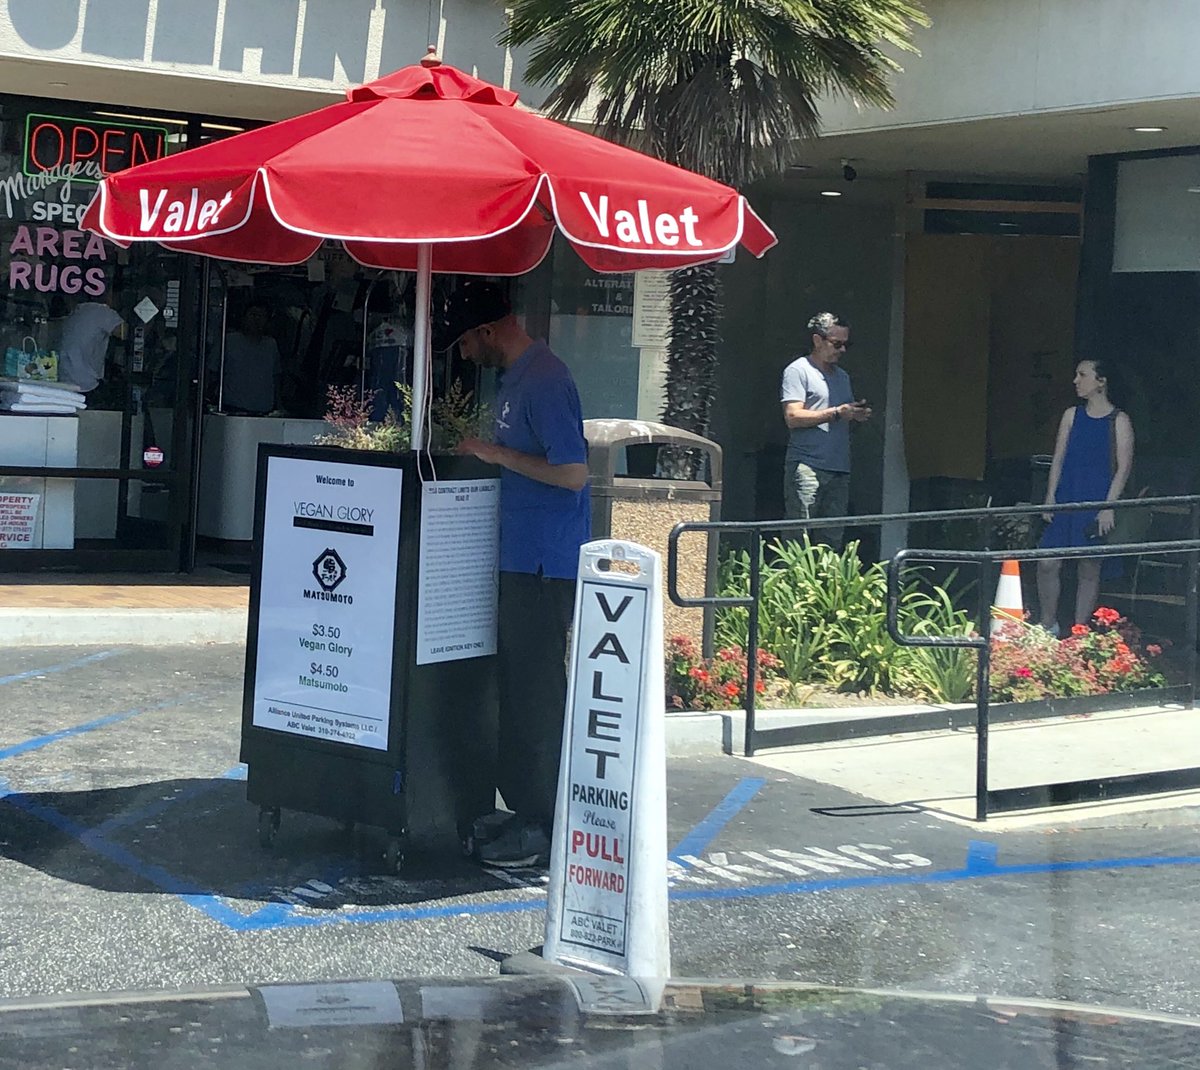 sooo... LA's current 2019 *winner* for misusing an #accessible parking spot: @VeganGlory at 8393 Beverly Bl. puts their valet IN the CLEARLY marked accessible space EVERY DAY...& blocks the minimall ramp too
cc @LACDOD @MayorOfLA   #disabled #SuckItAbleism #CripTheVote  #ADAFAIL